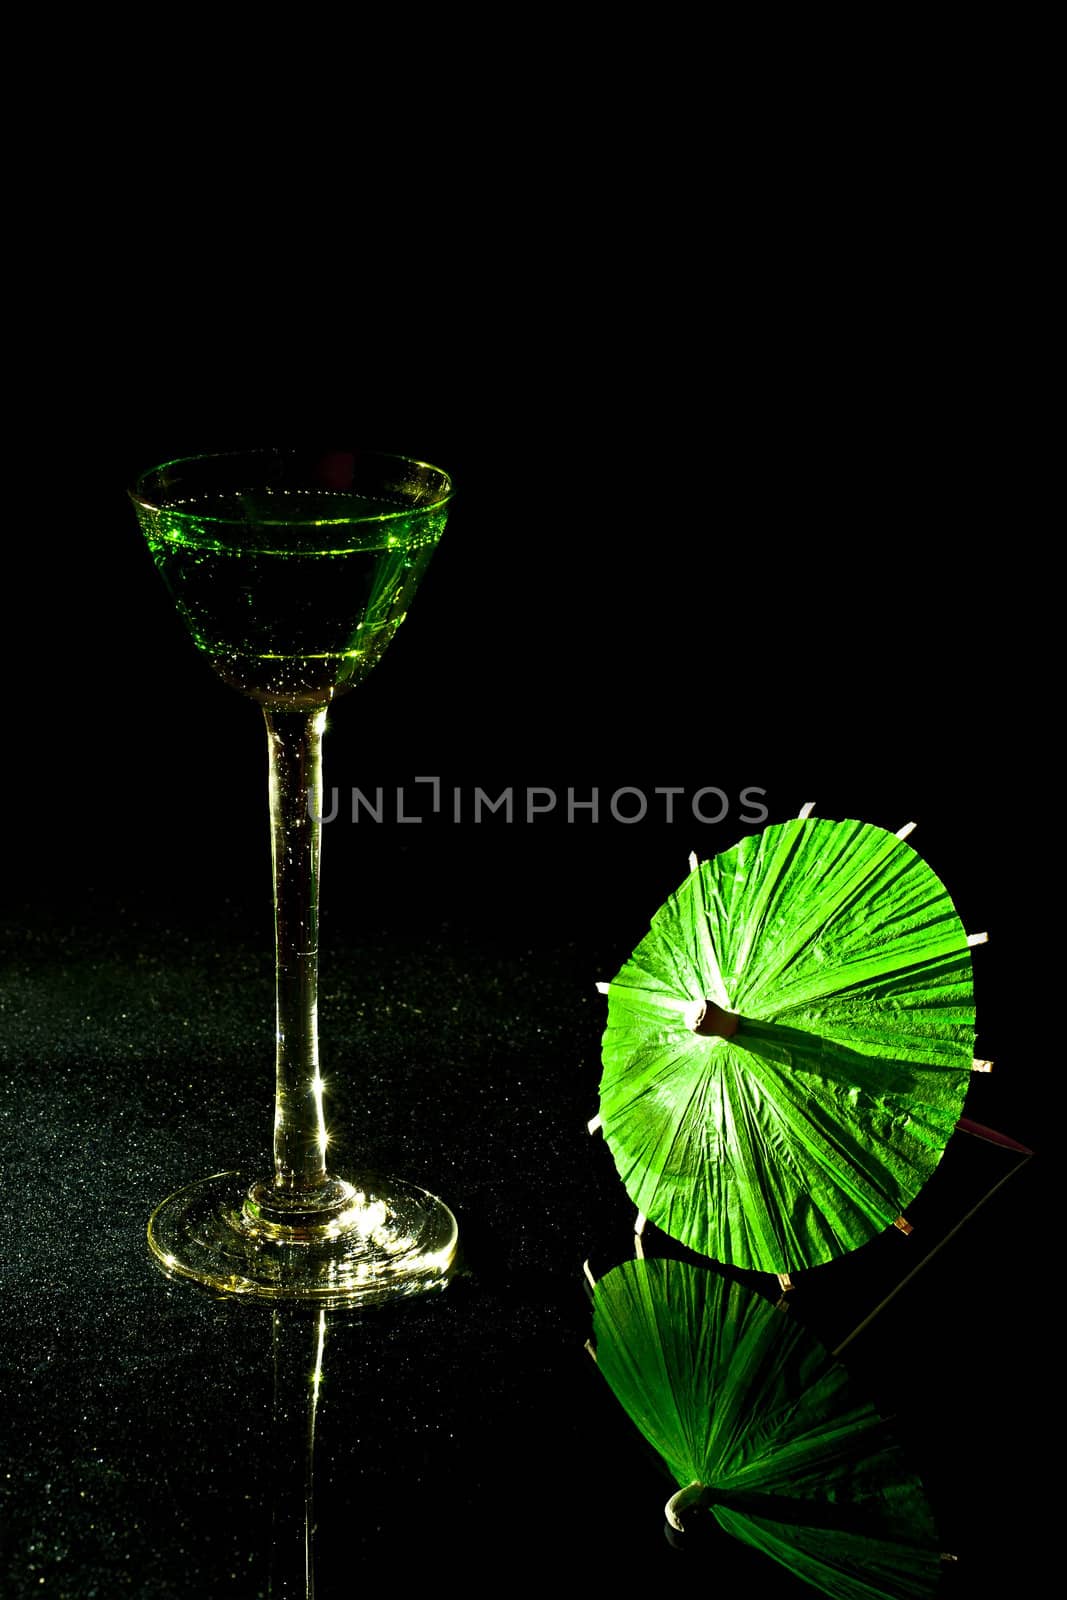 On a black background with green cocktail glass vermouth and a green parasol.
